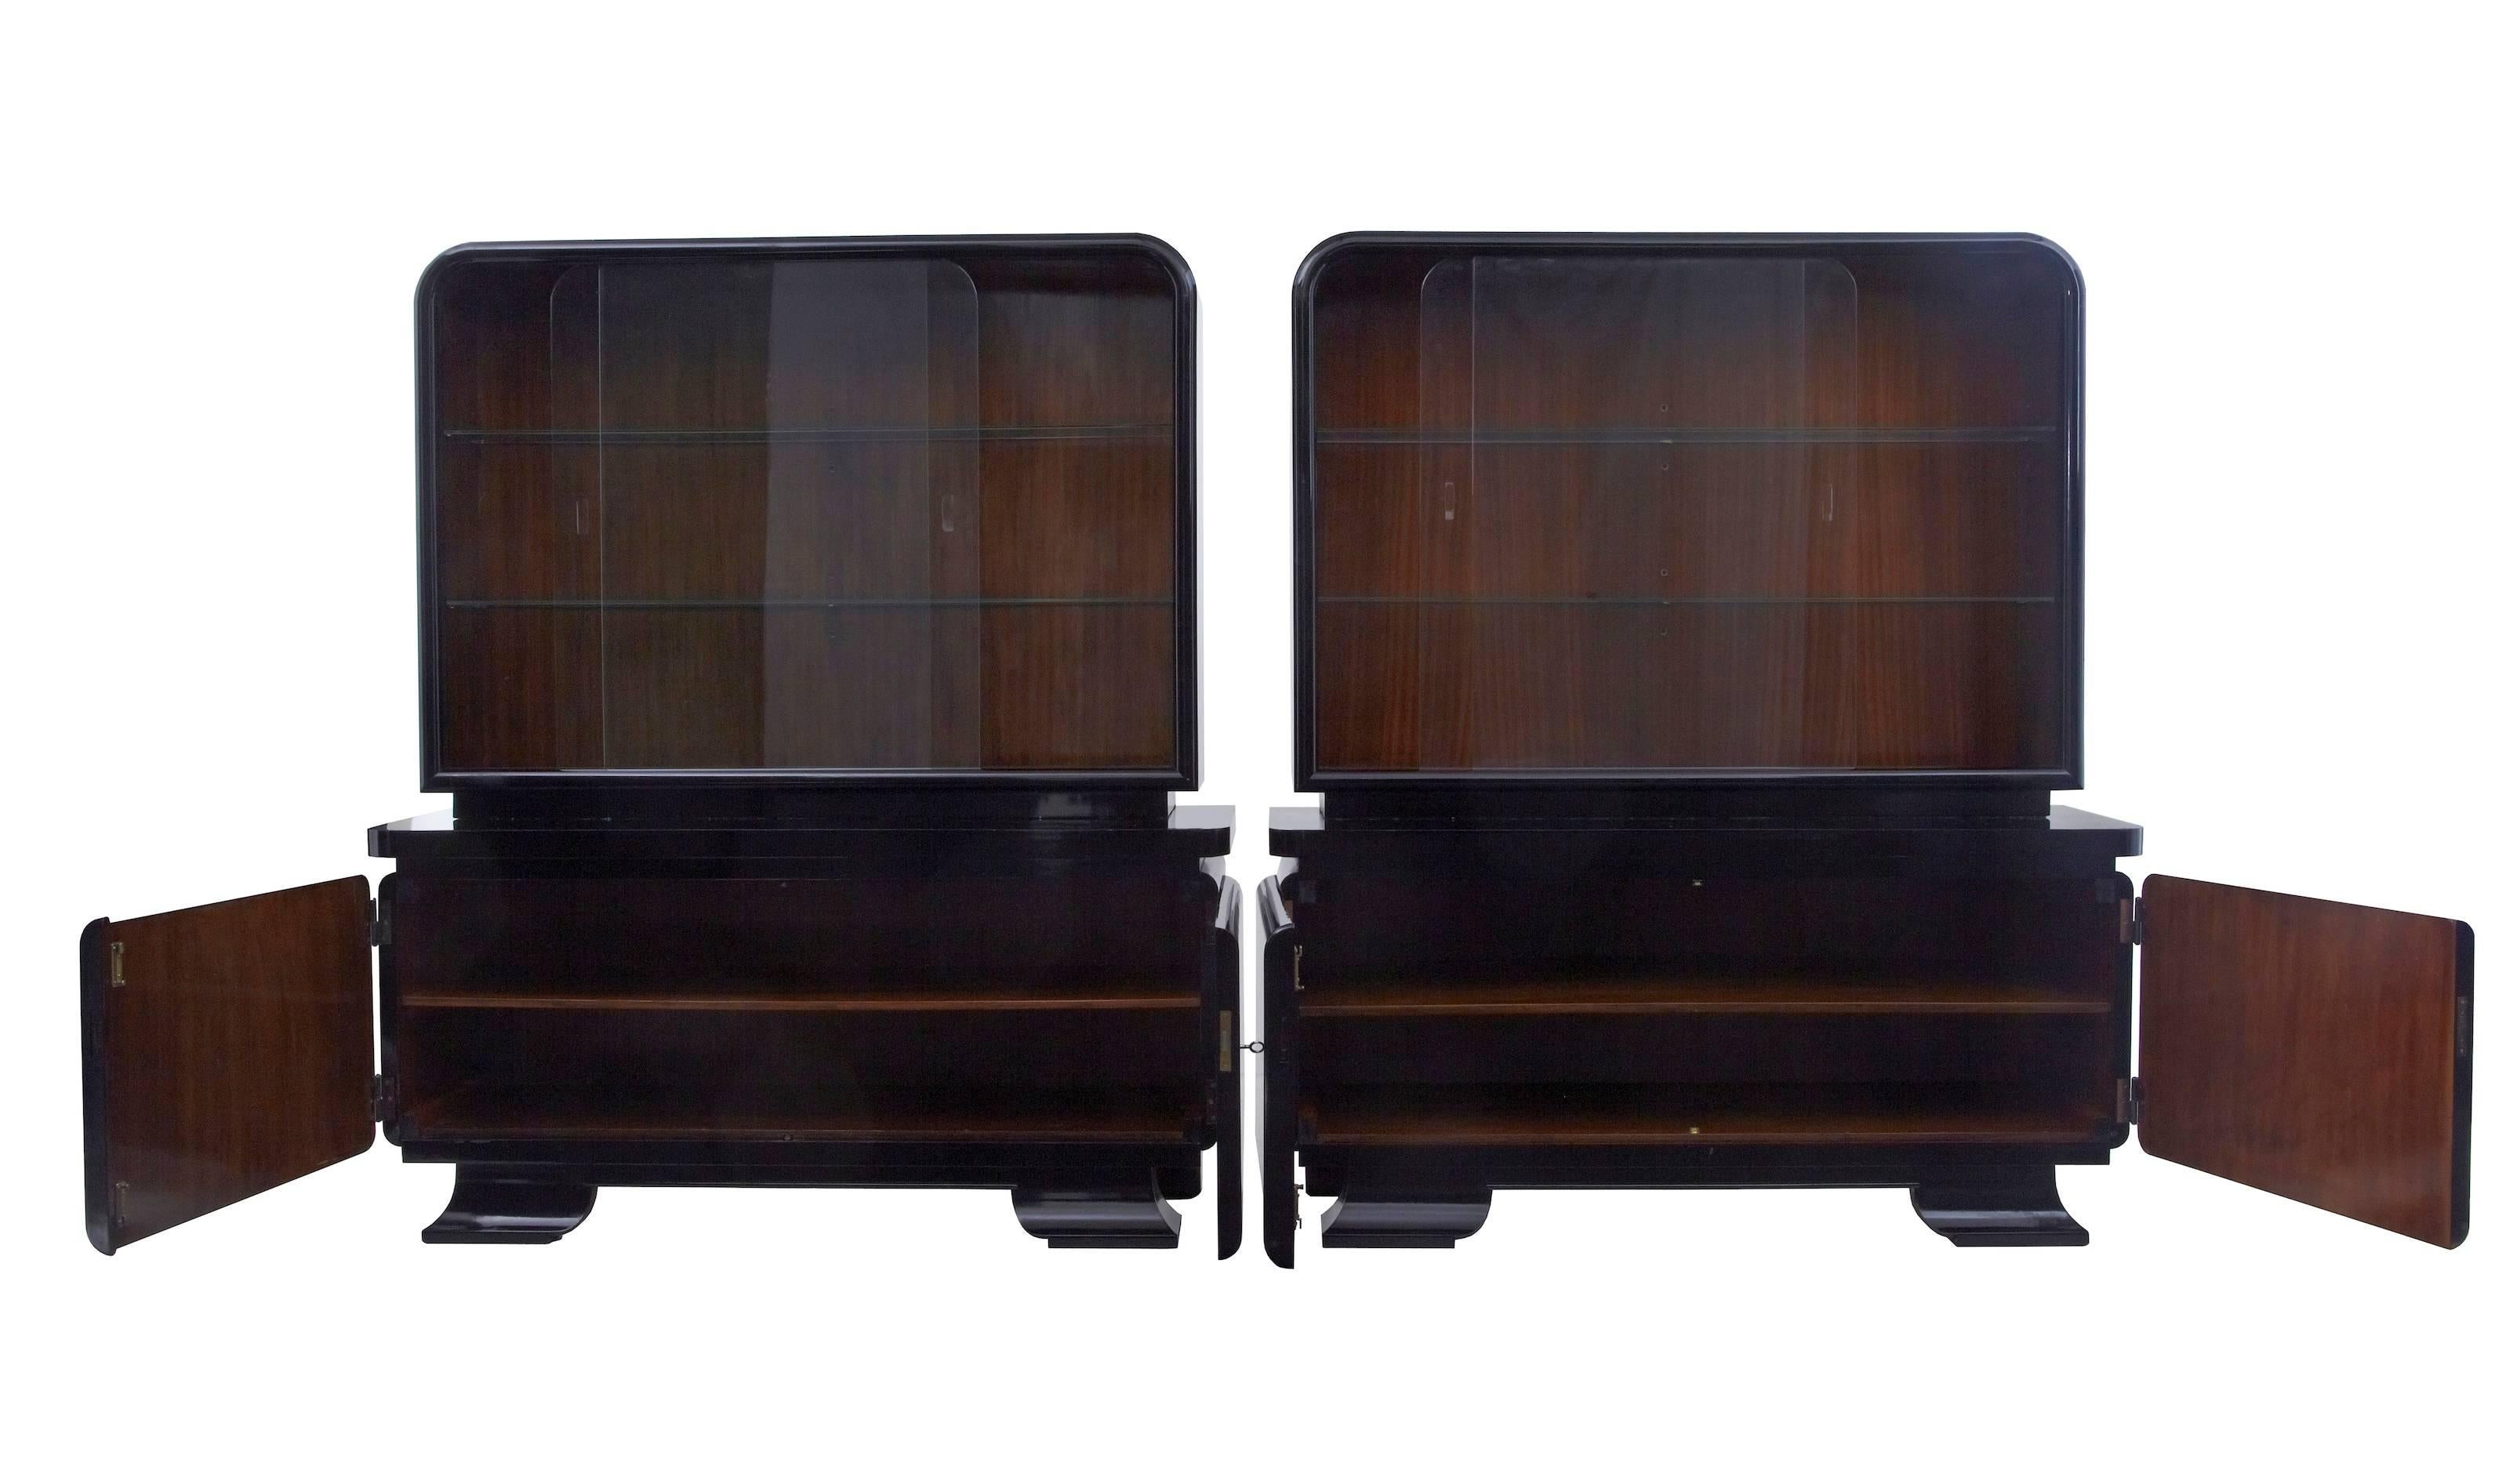 Debenham antiques are proud to offer a premium pair of stylish Art Deco cabinet / vitrines, circa 1930.
Comprising of two parts.
Finished in black lacquer with contrasting wood interiors.
Top section with glass doors and two glass